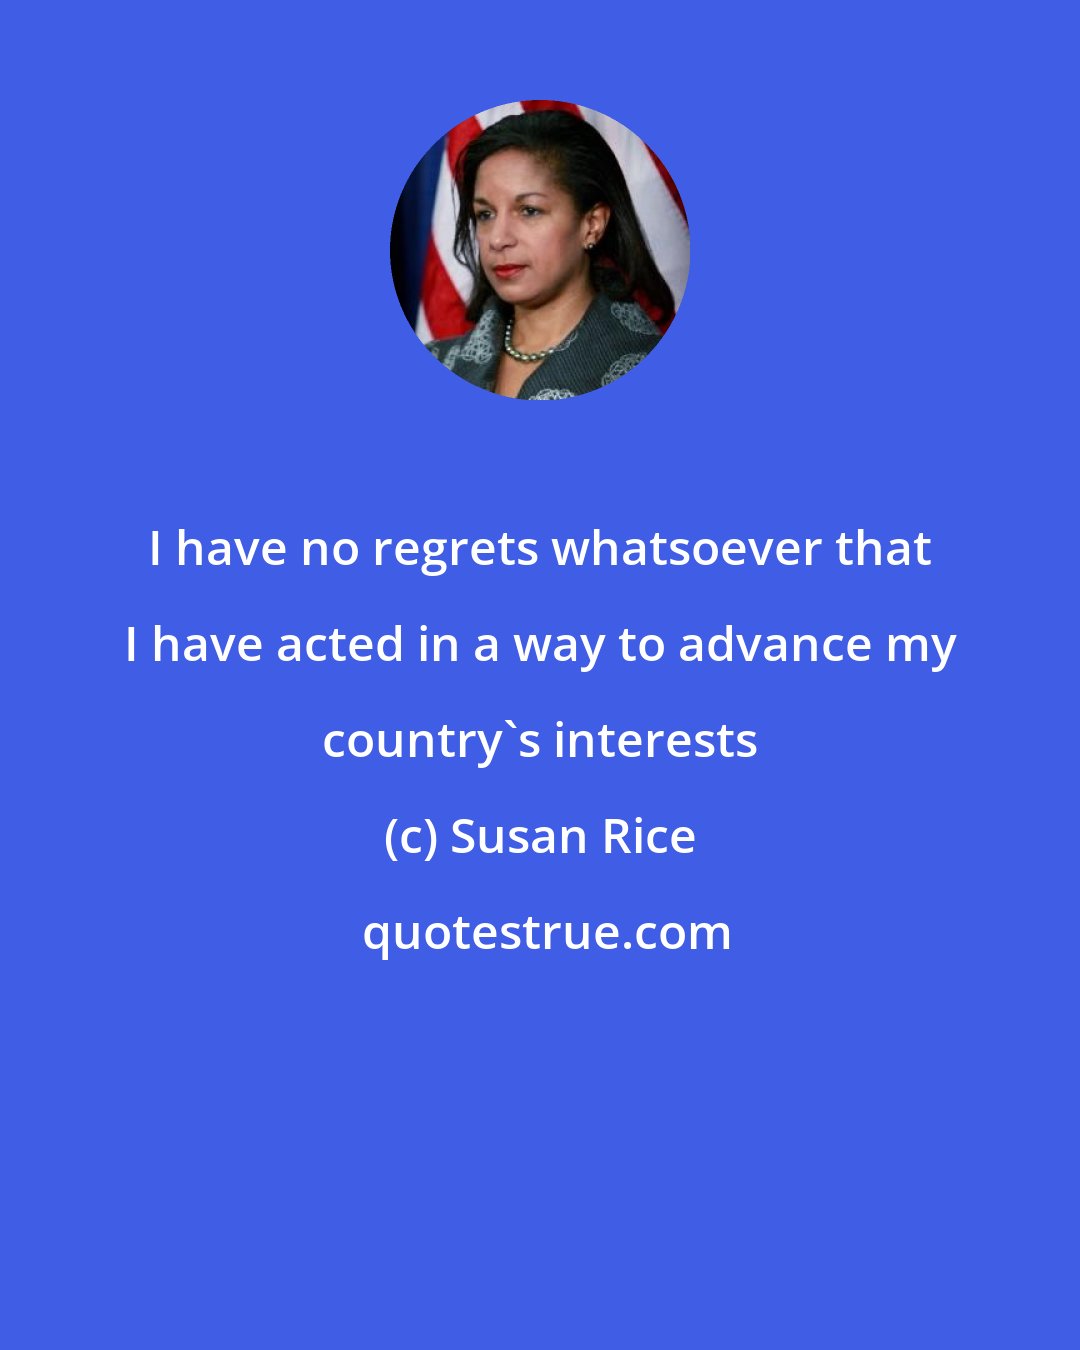 Susan Rice: I have no regrets whatsoever that I have acted in a way to advance my country's interests